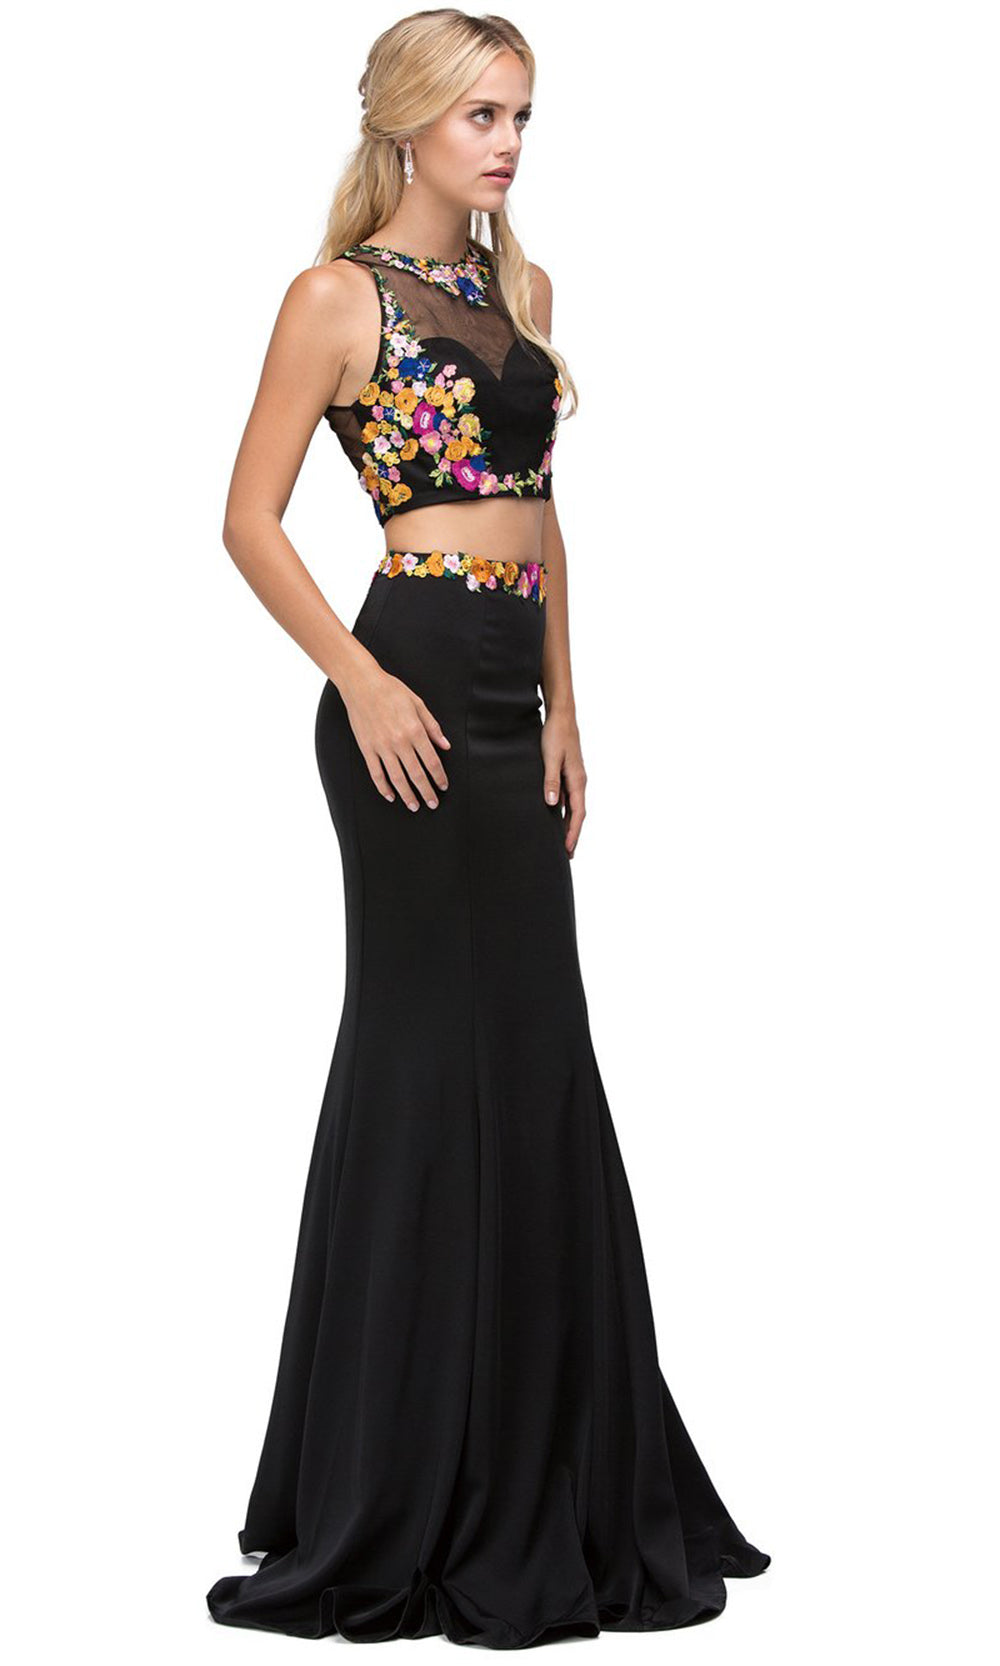 Dancing Queen - 9778 Two Piece Embroidered Mermaid Dress In Black and Yellow